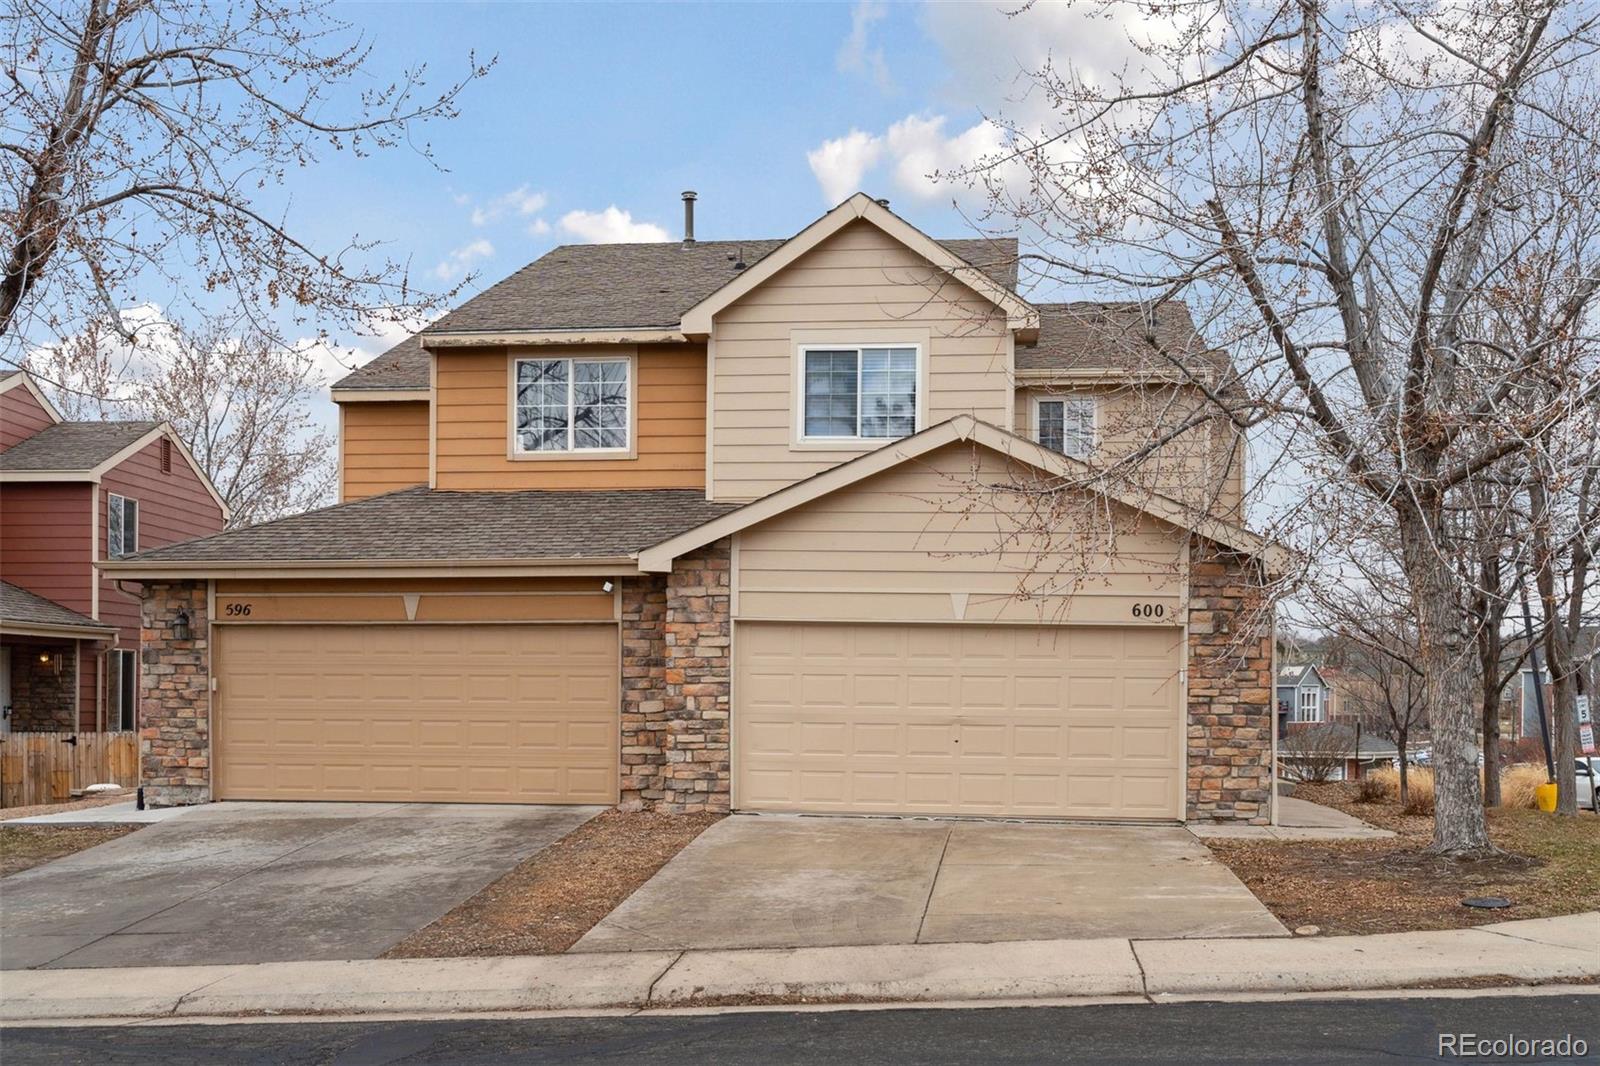 600 w 91st circle, Thornton sold home. Closed on 2024-03-15 for $435,000.